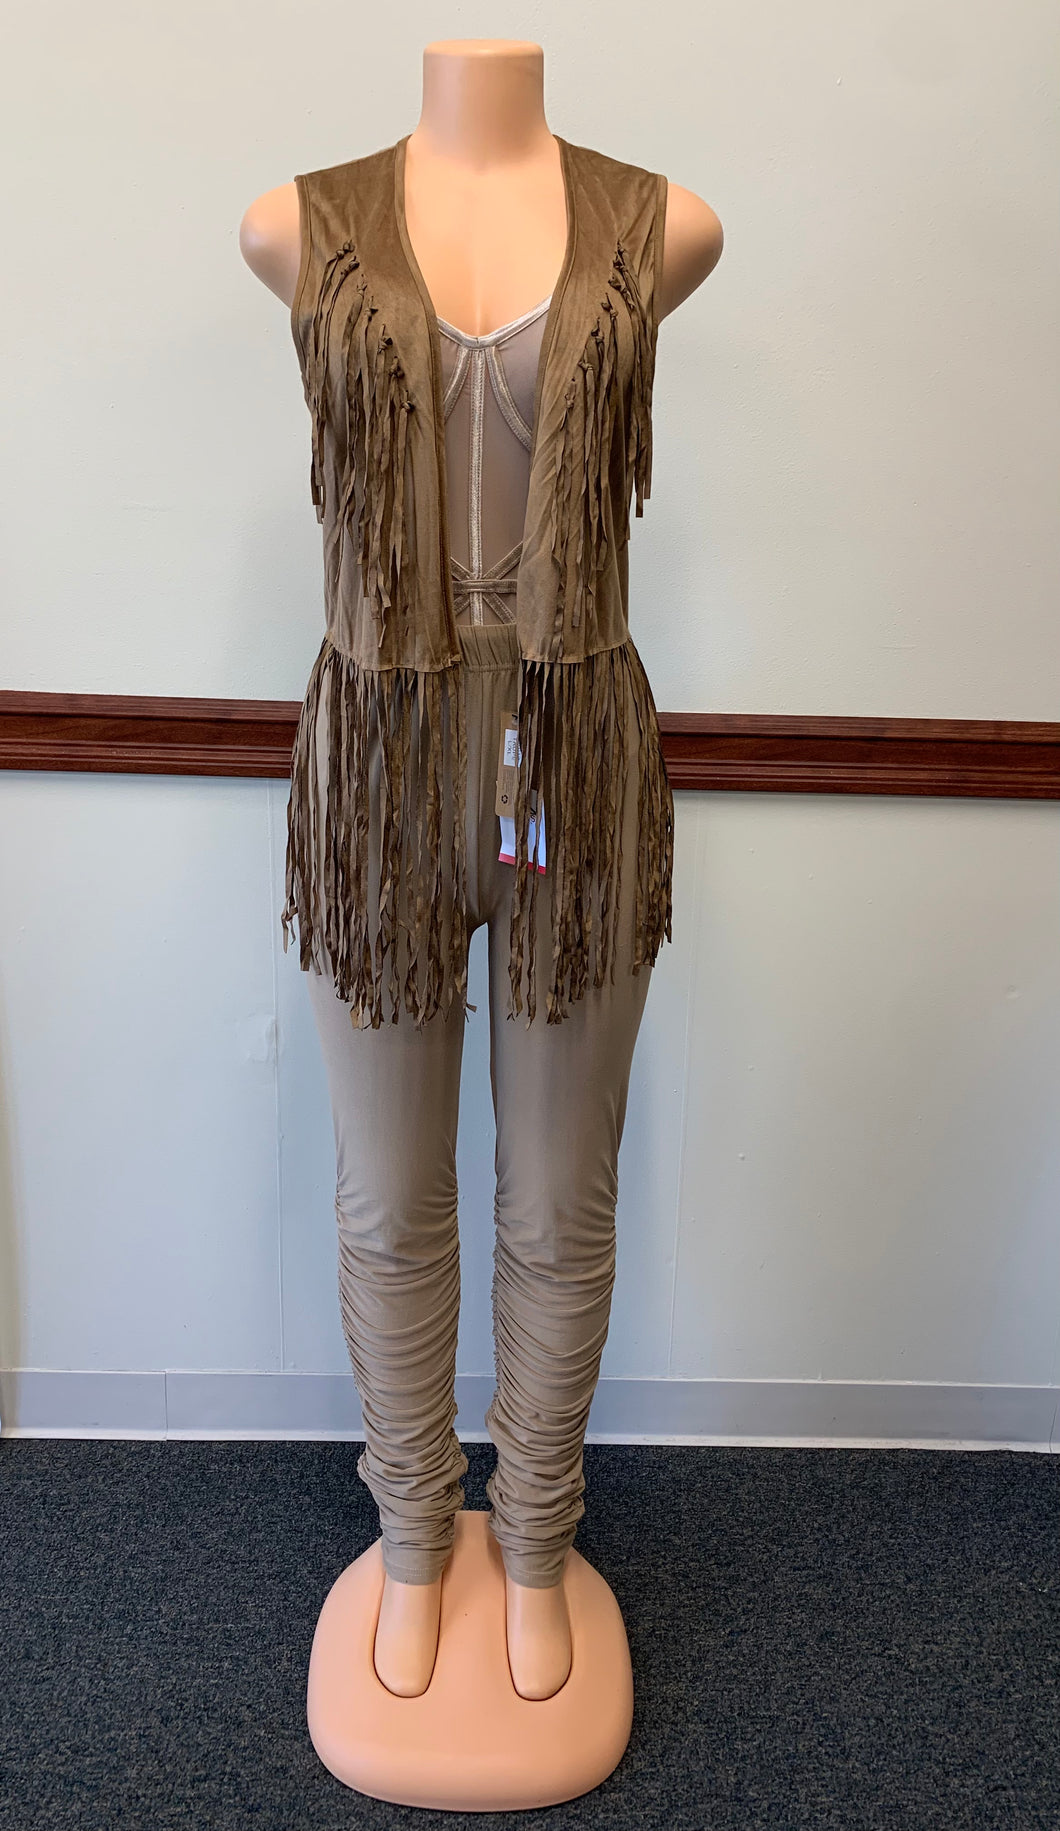 Tan Suede Vest with Tassels Available in Sizes S-L